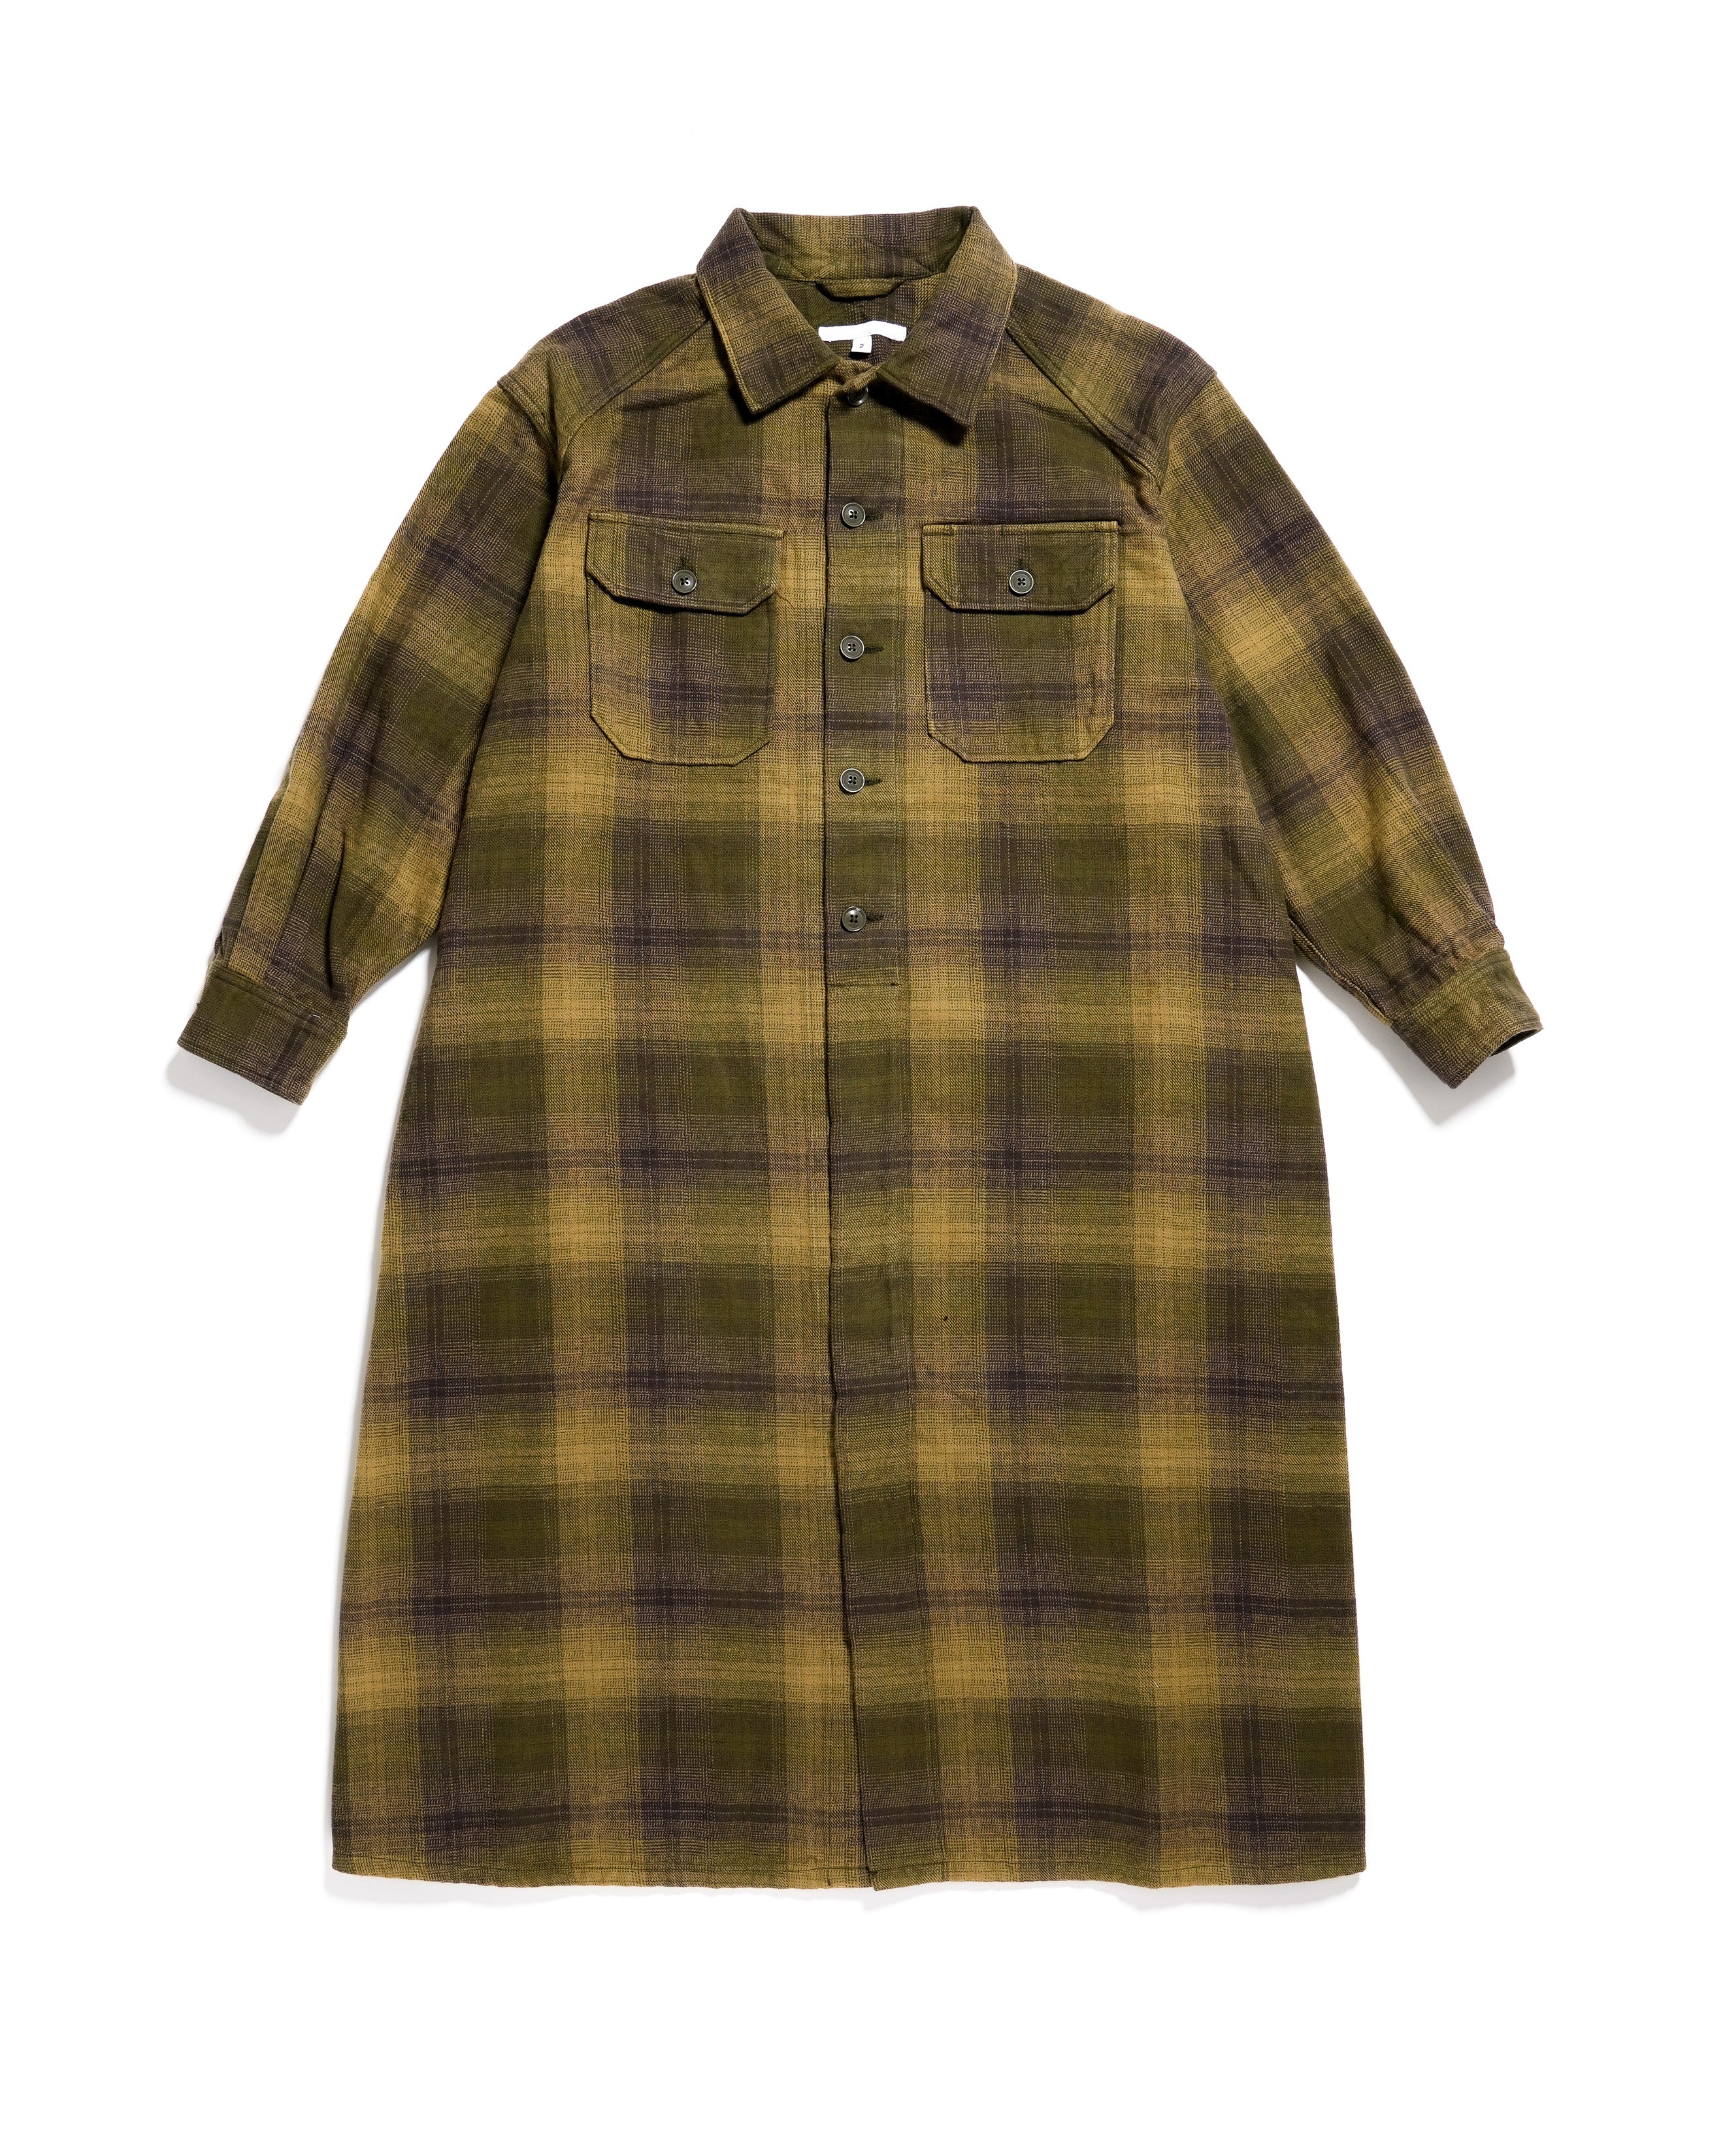 M51 Dress - Olive Check Flannel